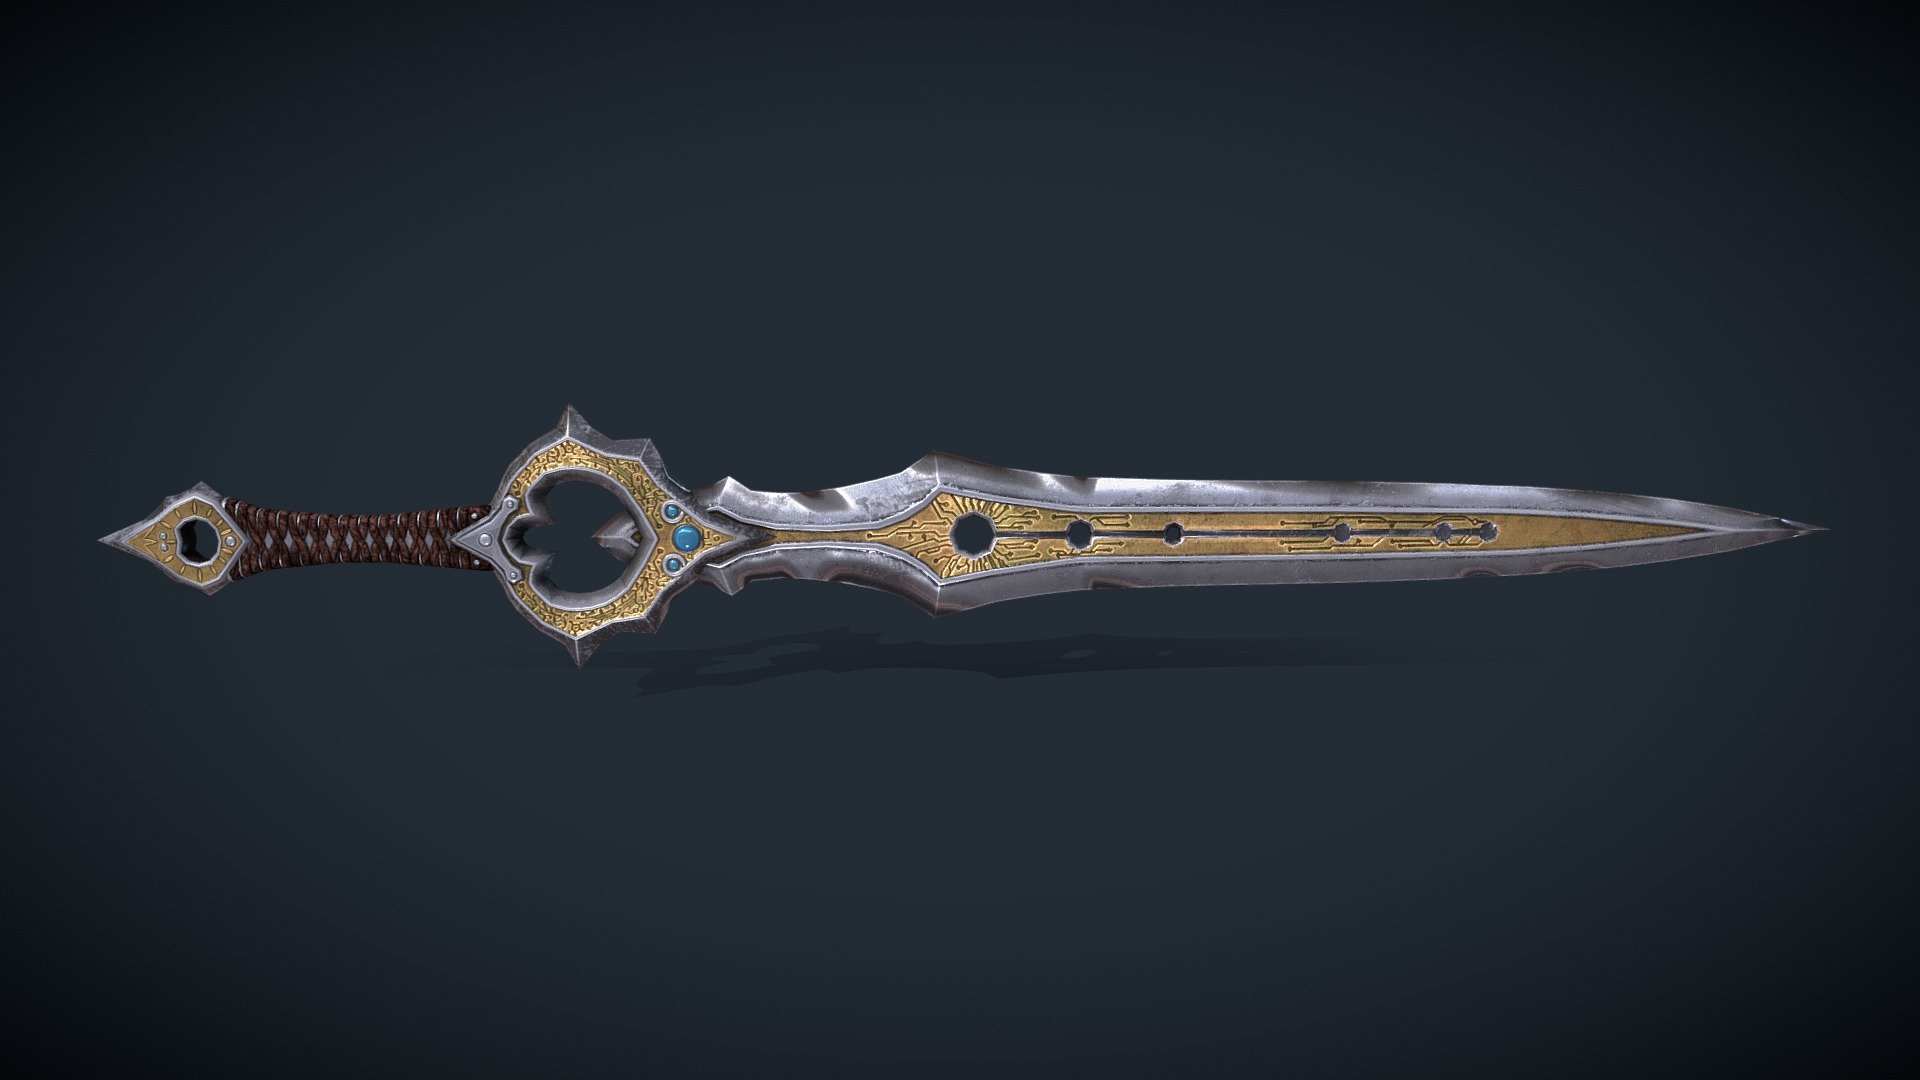 infinity blade sword black and white